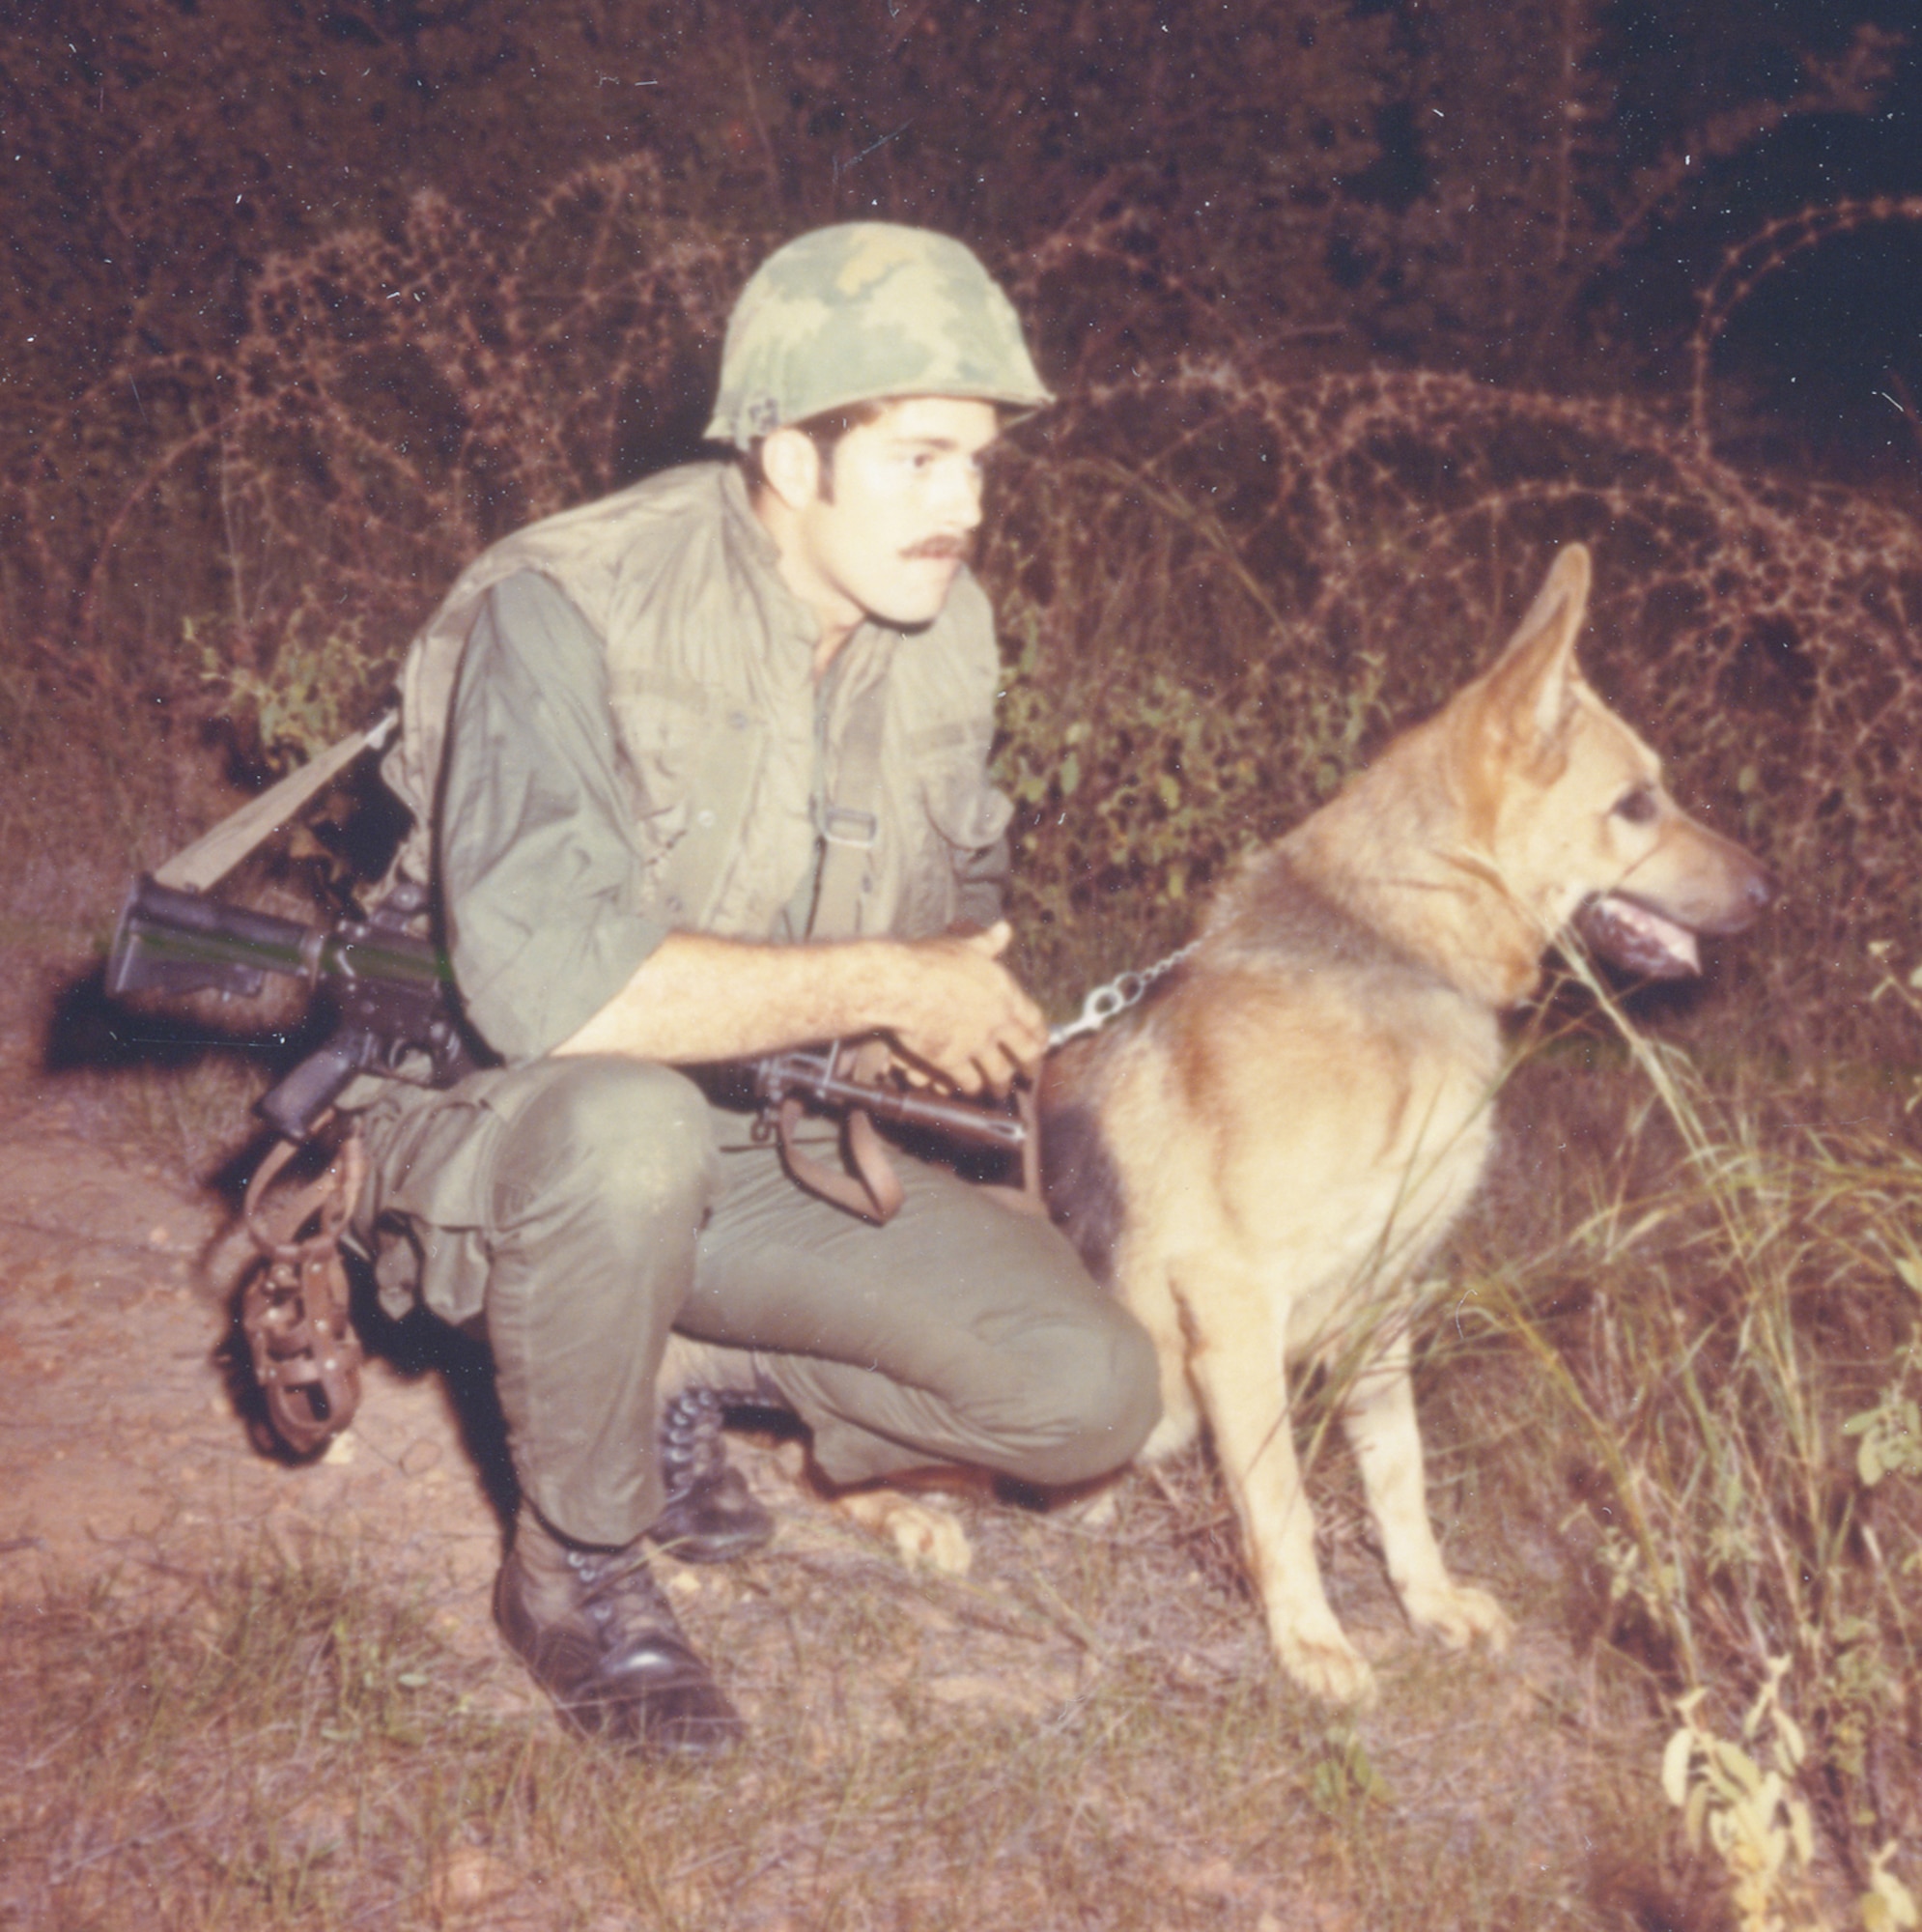 U.S. Air Force dog handlers used a shortened version of the M16, the GAU-5/A. (U.S. Air Force photo).